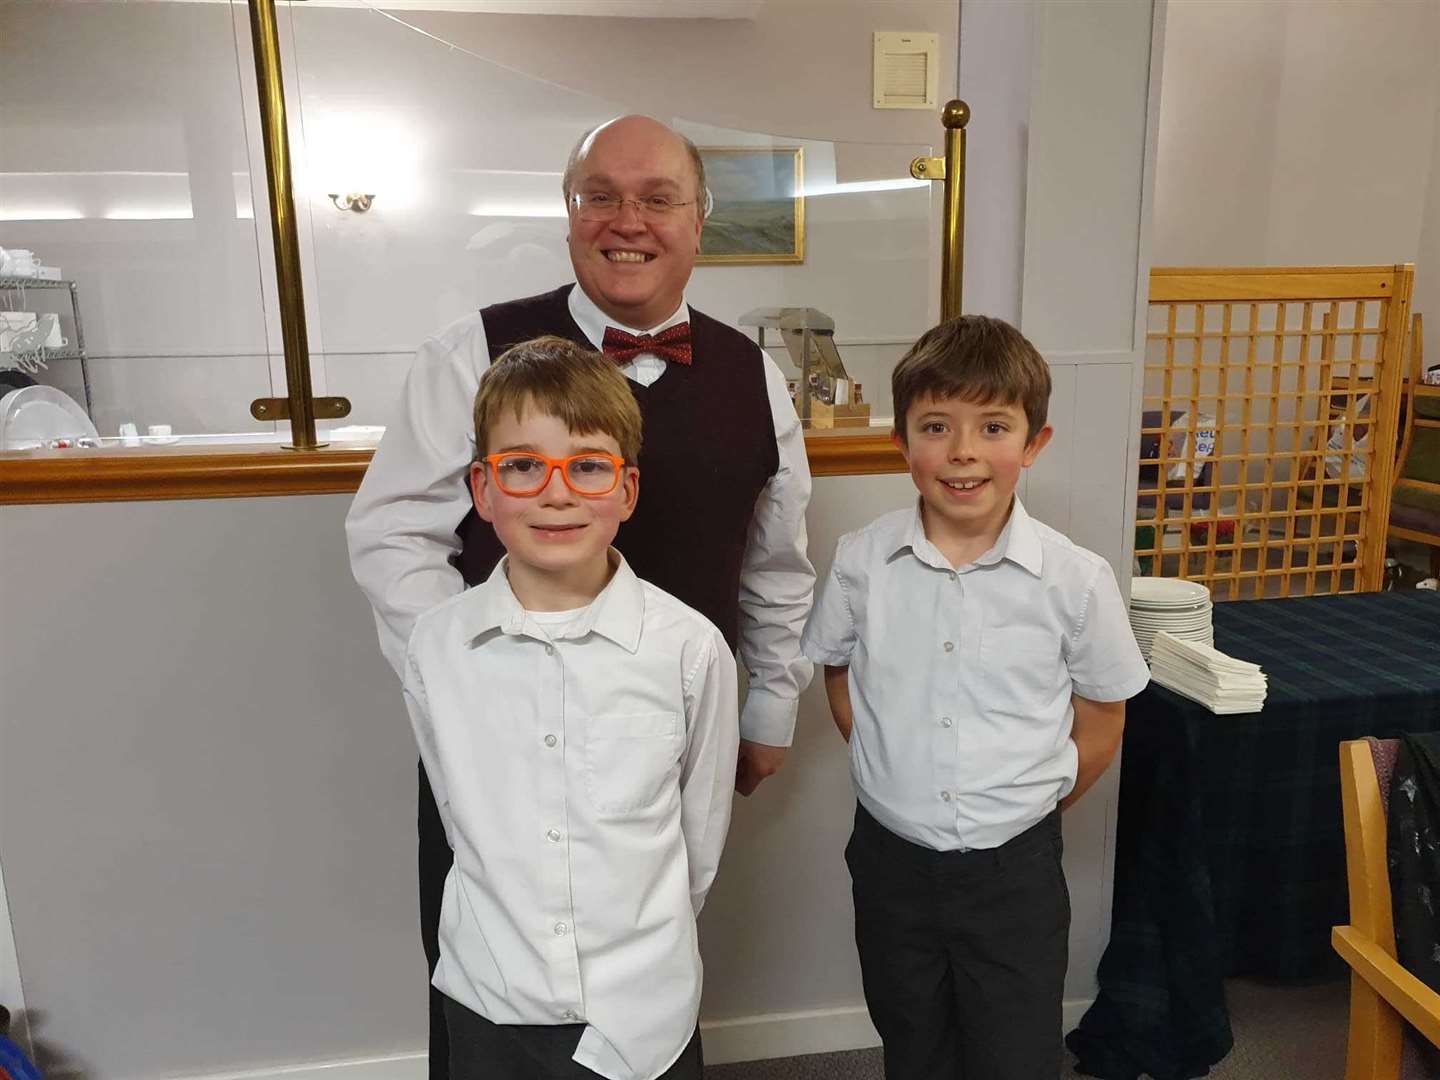 Rotarian Simon Scott was ably assisted as bingo caller at the St Andrew’s night fundraiser by these two young lads.